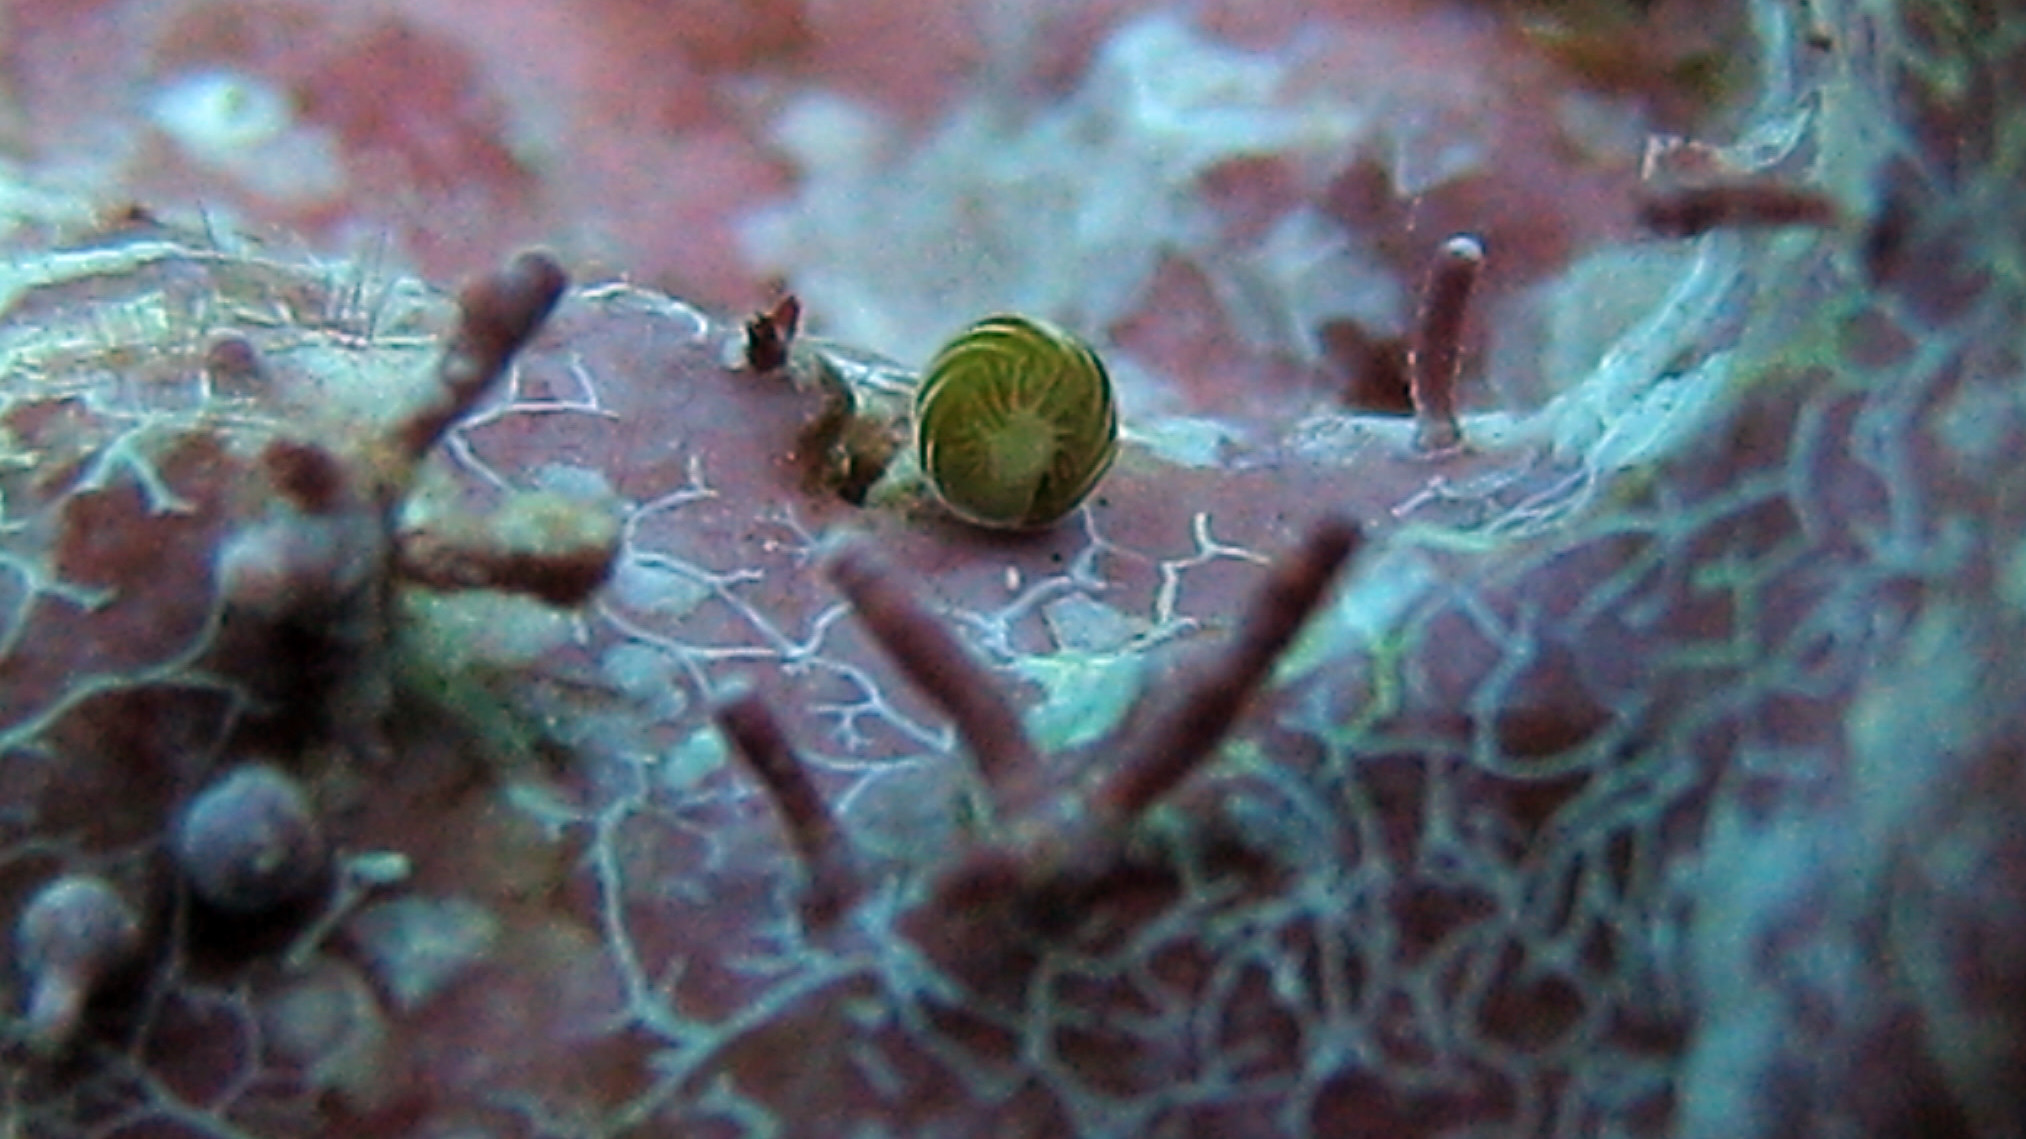 Amphistegina gibbosa in situ (in life position). (Image: Image by D. E. Williams and courtesy of Pamela Muller)